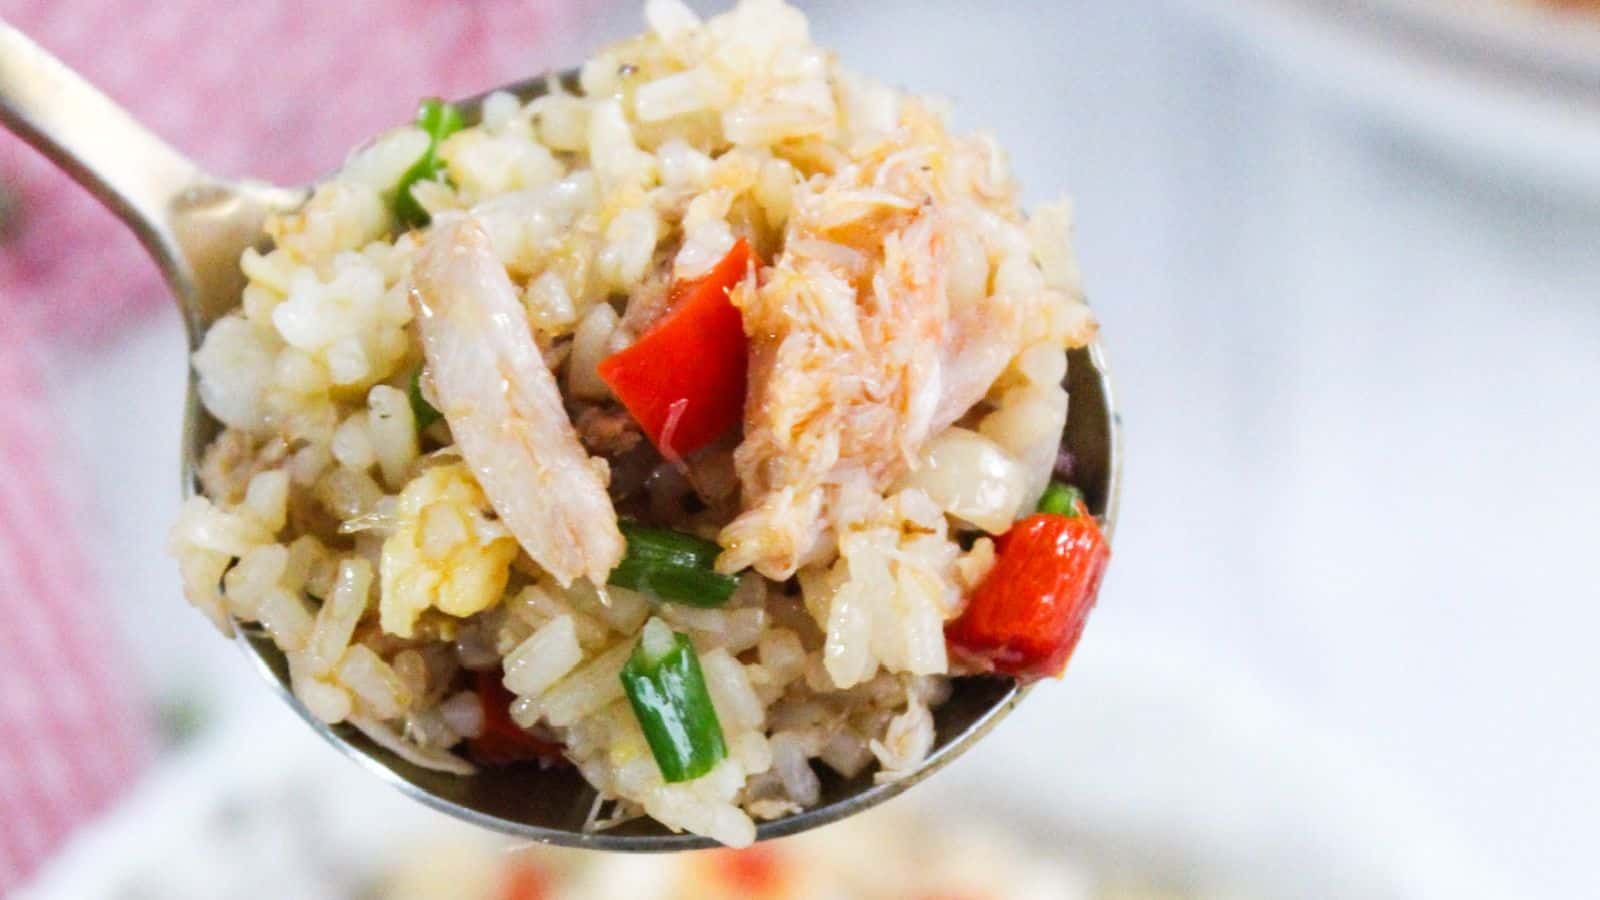 A bowl of fried rice with vegetables and crab meat.